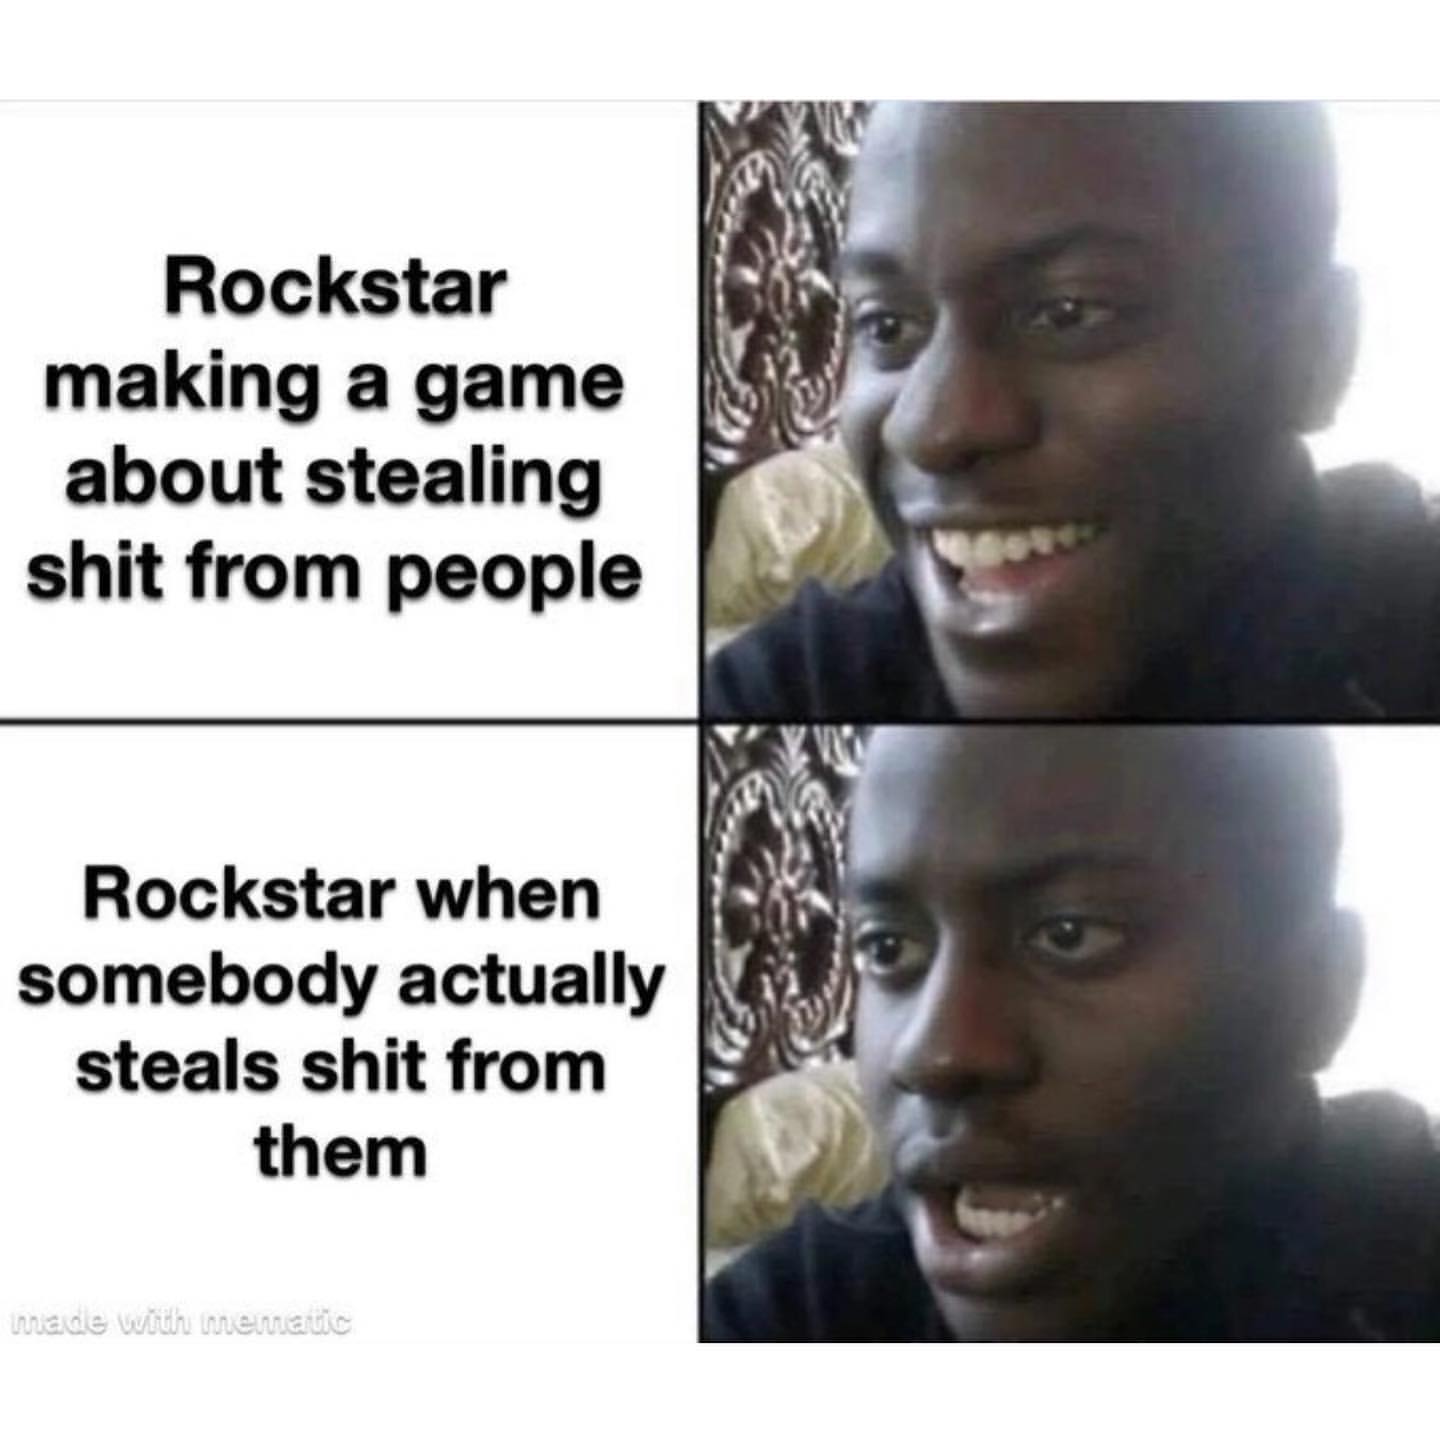 Rockstar making a game about stealing shit from people.  Rockstar when somebody actually steals shit from them.